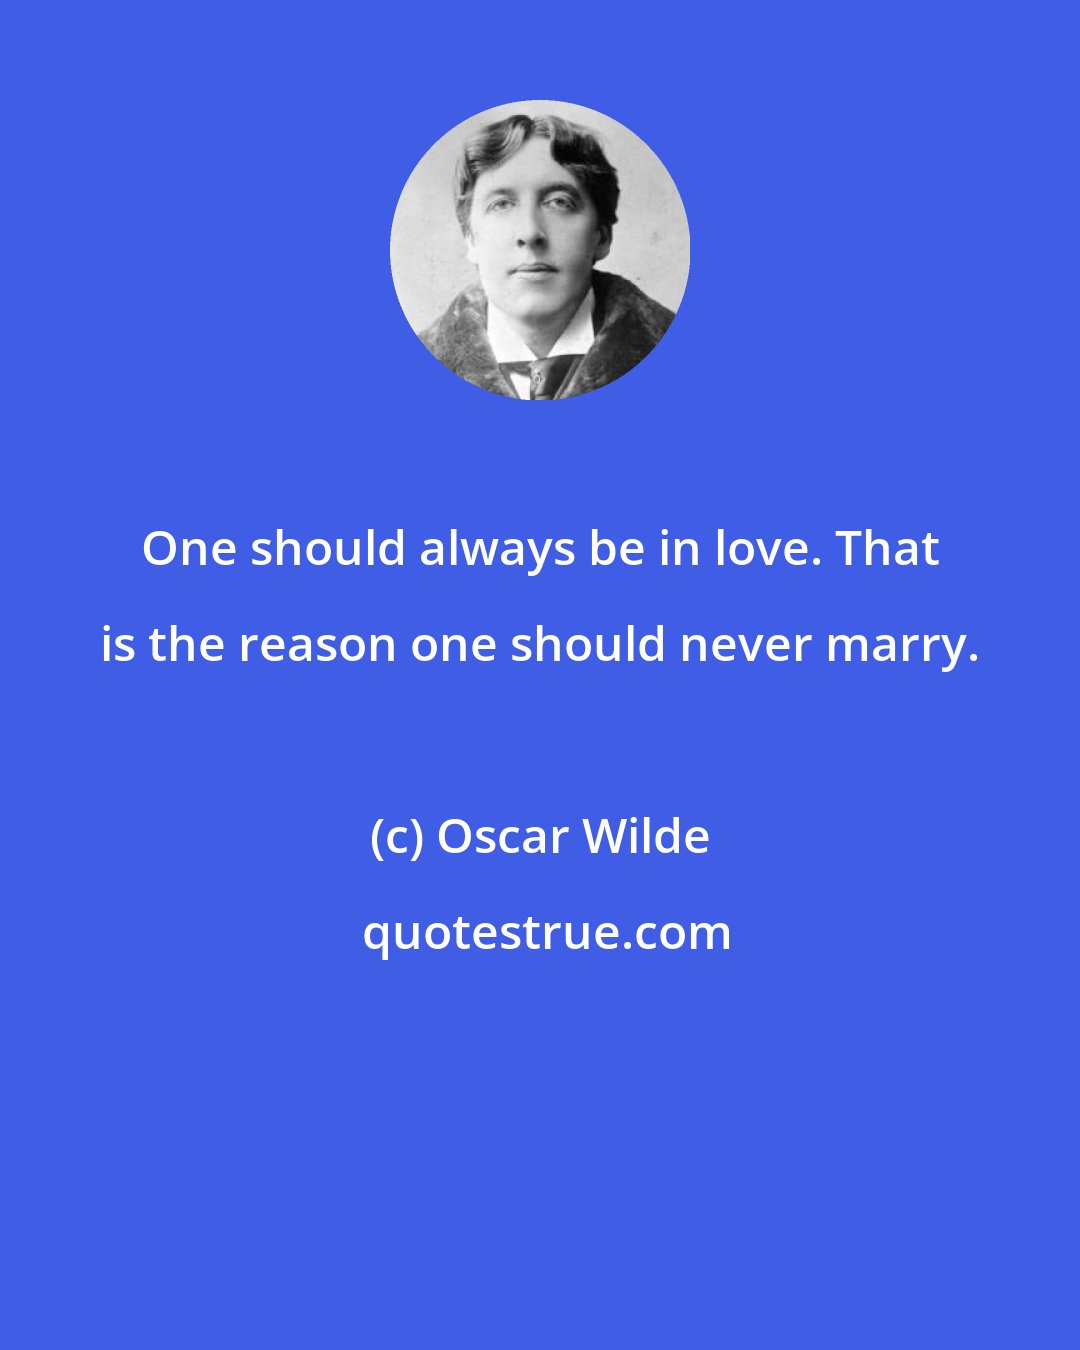 Oscar Wilde: One should always be in love. That is the reason one should never marry.